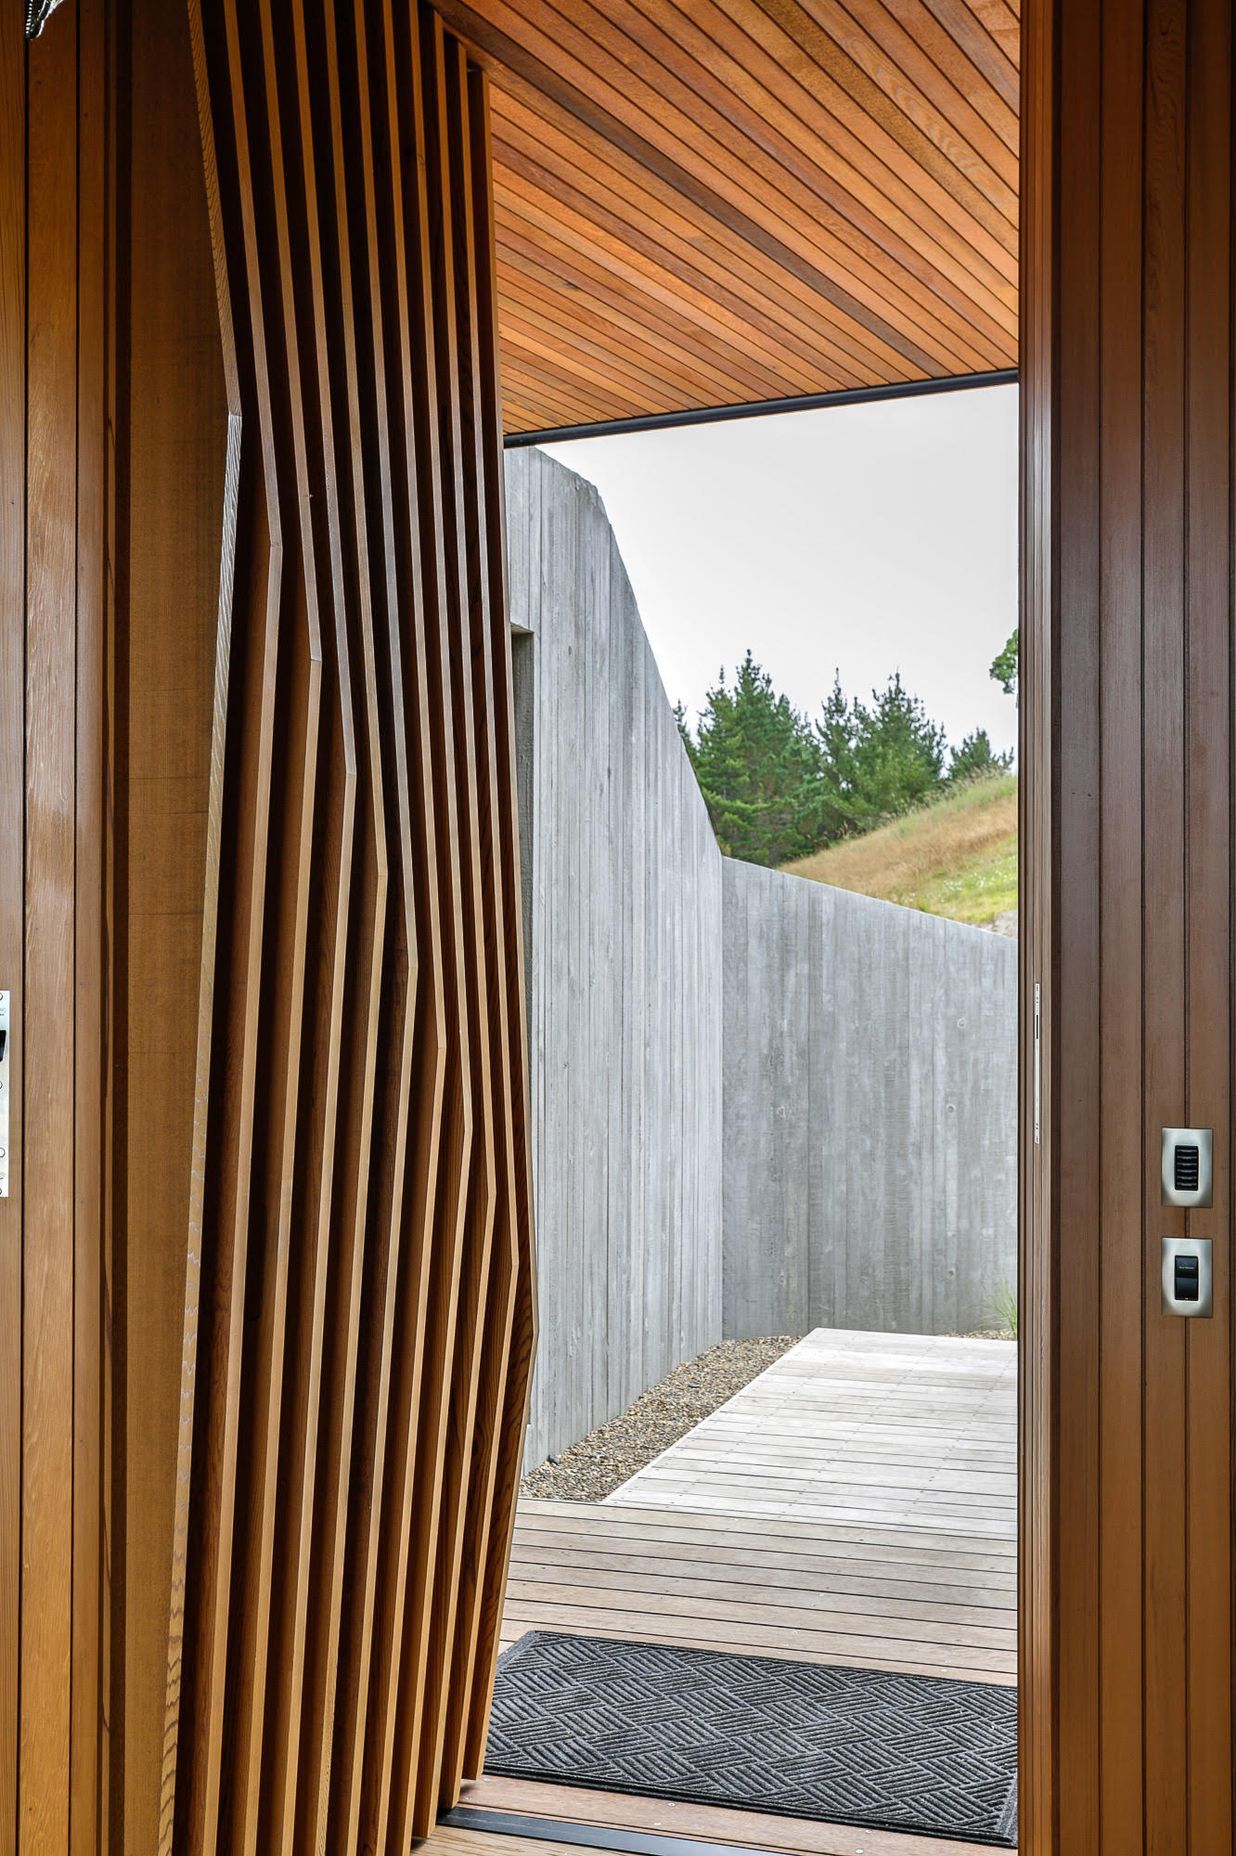 The faceted cedar fins on the main entry door each have a slighty different angle, playing on the vertical in situ formwork pattern of the spine entry wall.